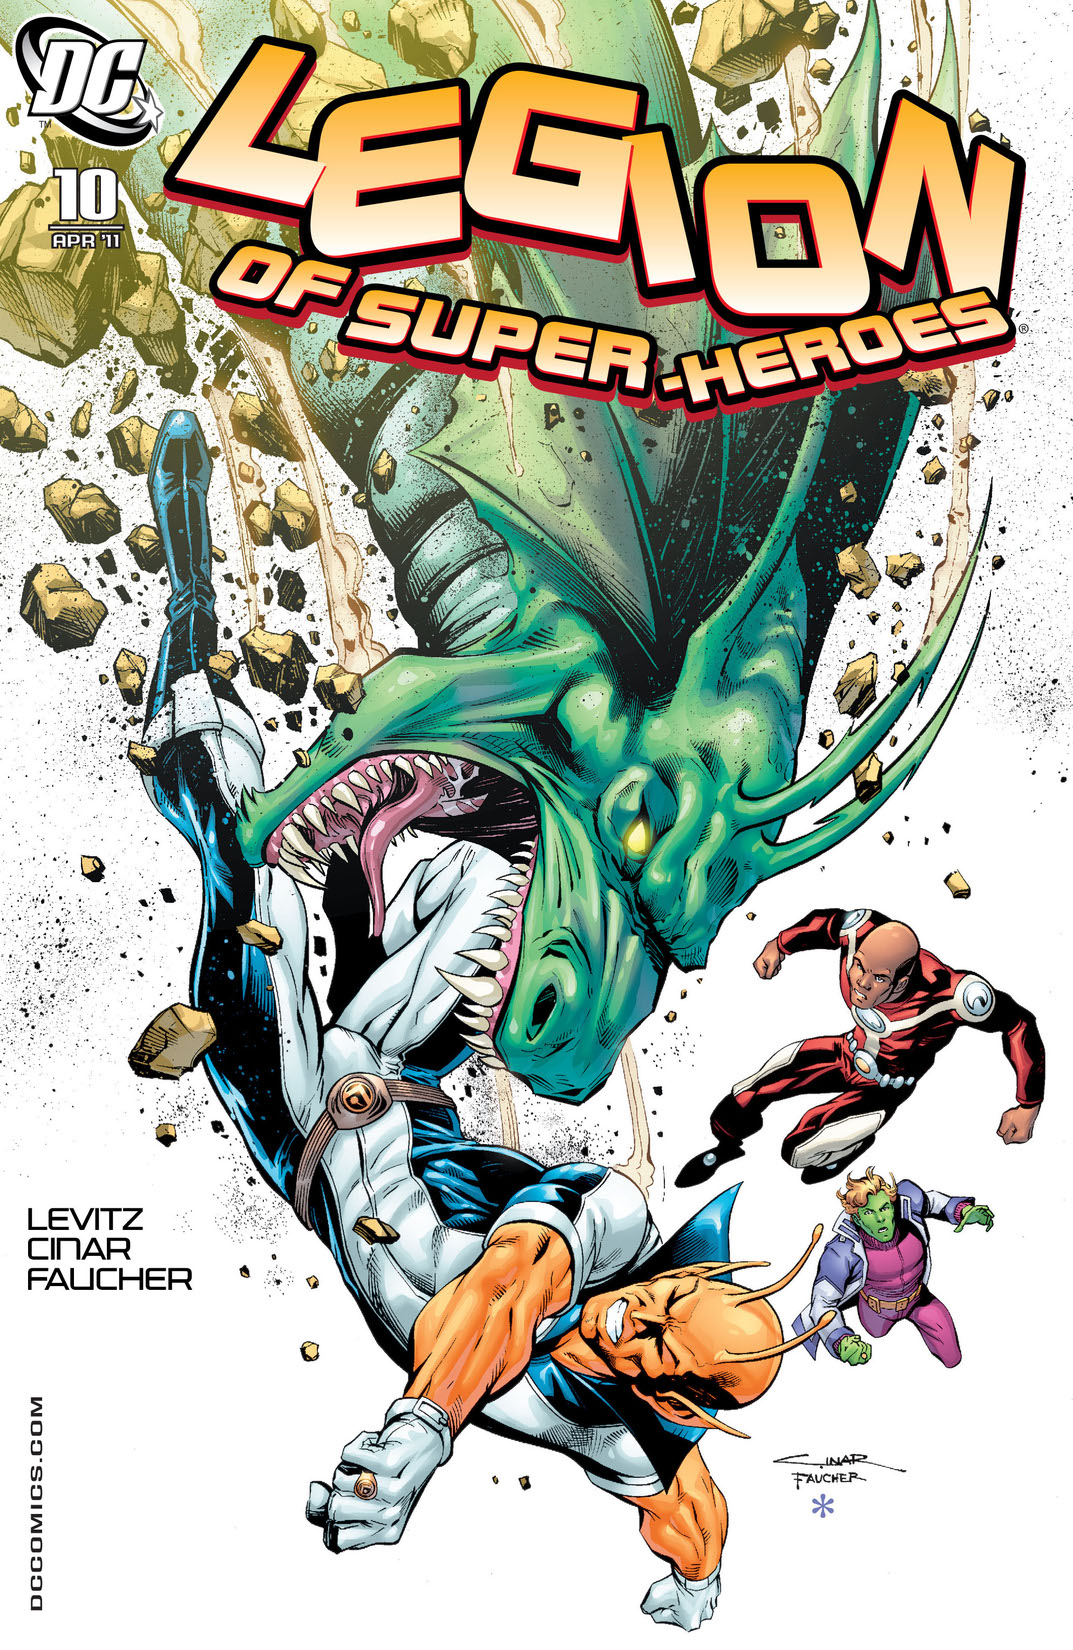 Legion of Super-Heroes (2010-) #10 preview images